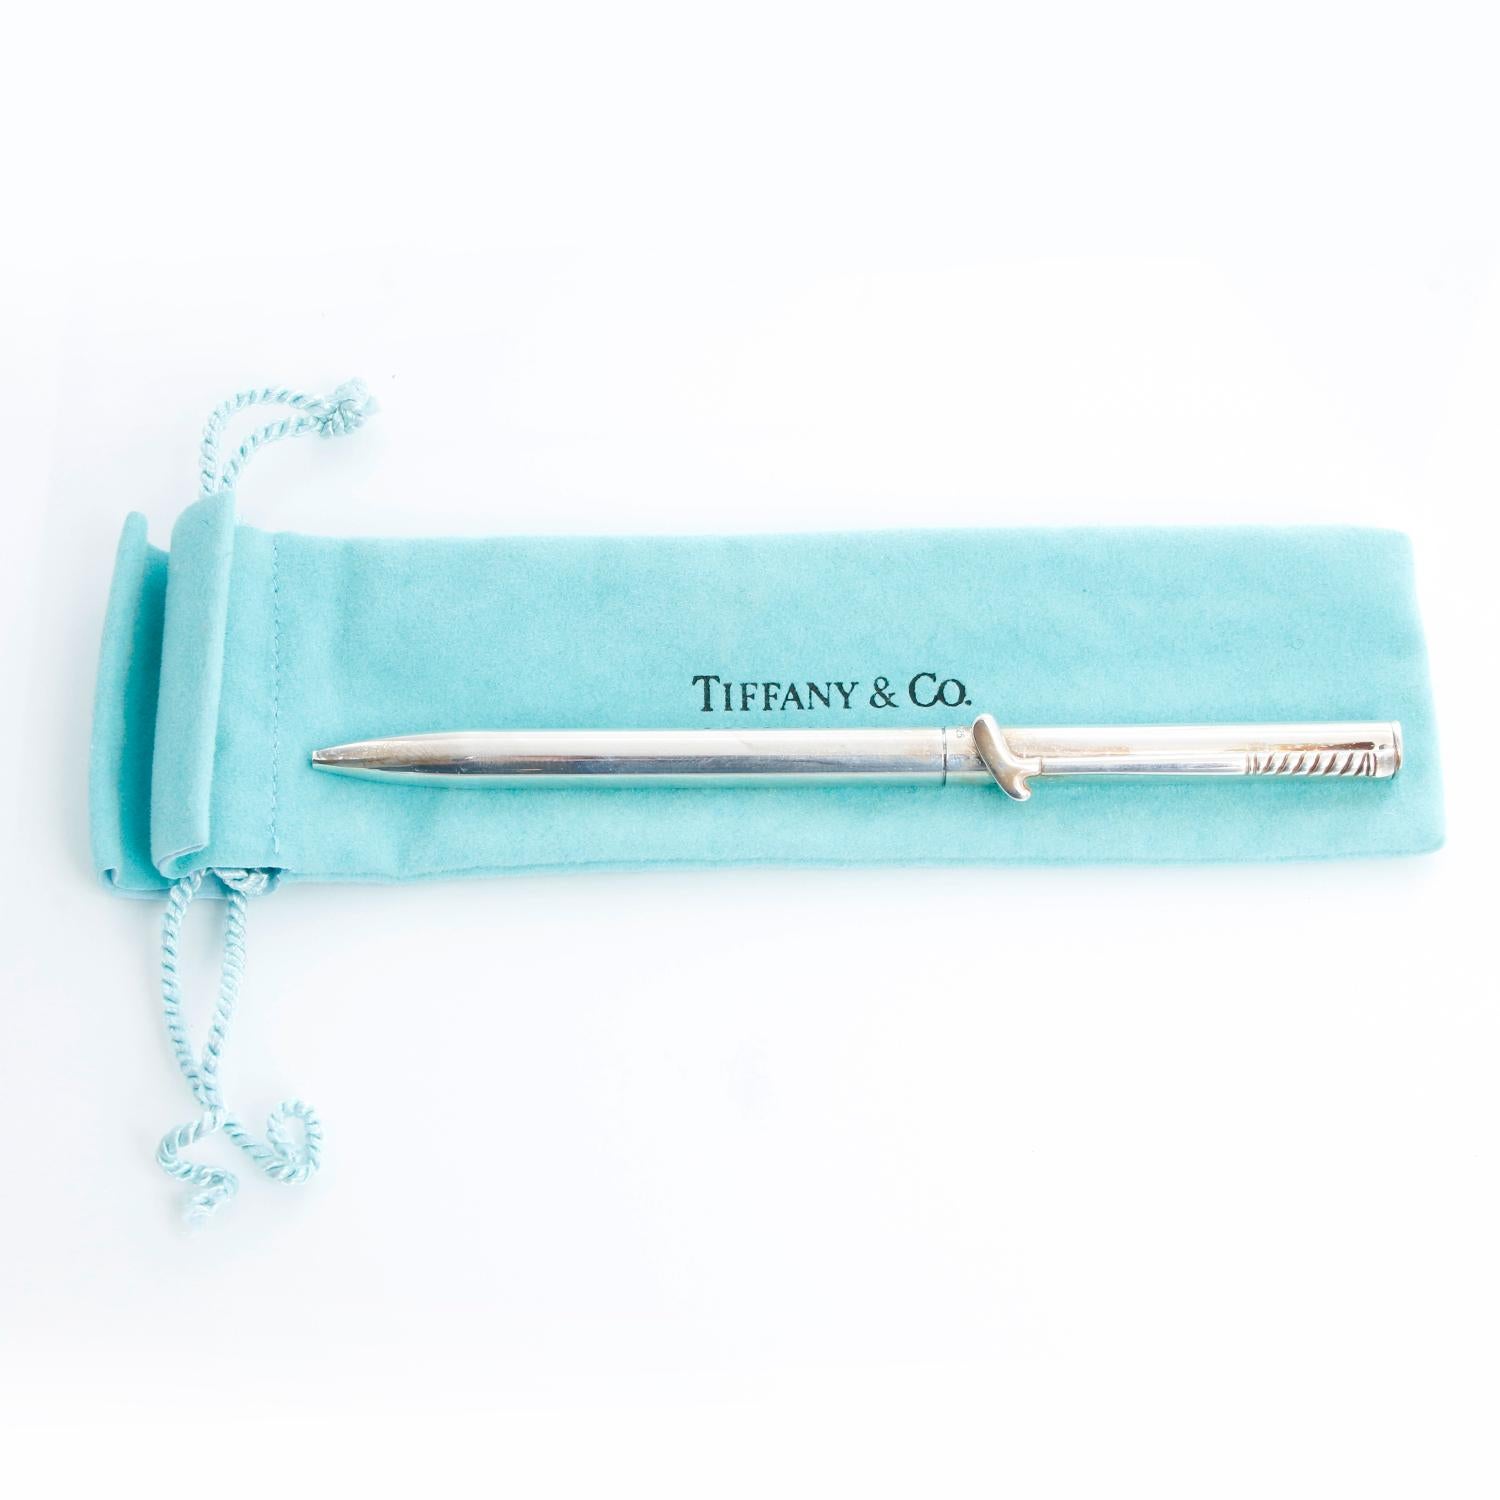 Tiffany & Co. Golf Club Ballpoint Pen  - Sterling silver Tiffany & Co. ballpoint pen with golf club pocket clip and twist retractable closure. Includes dust bag.